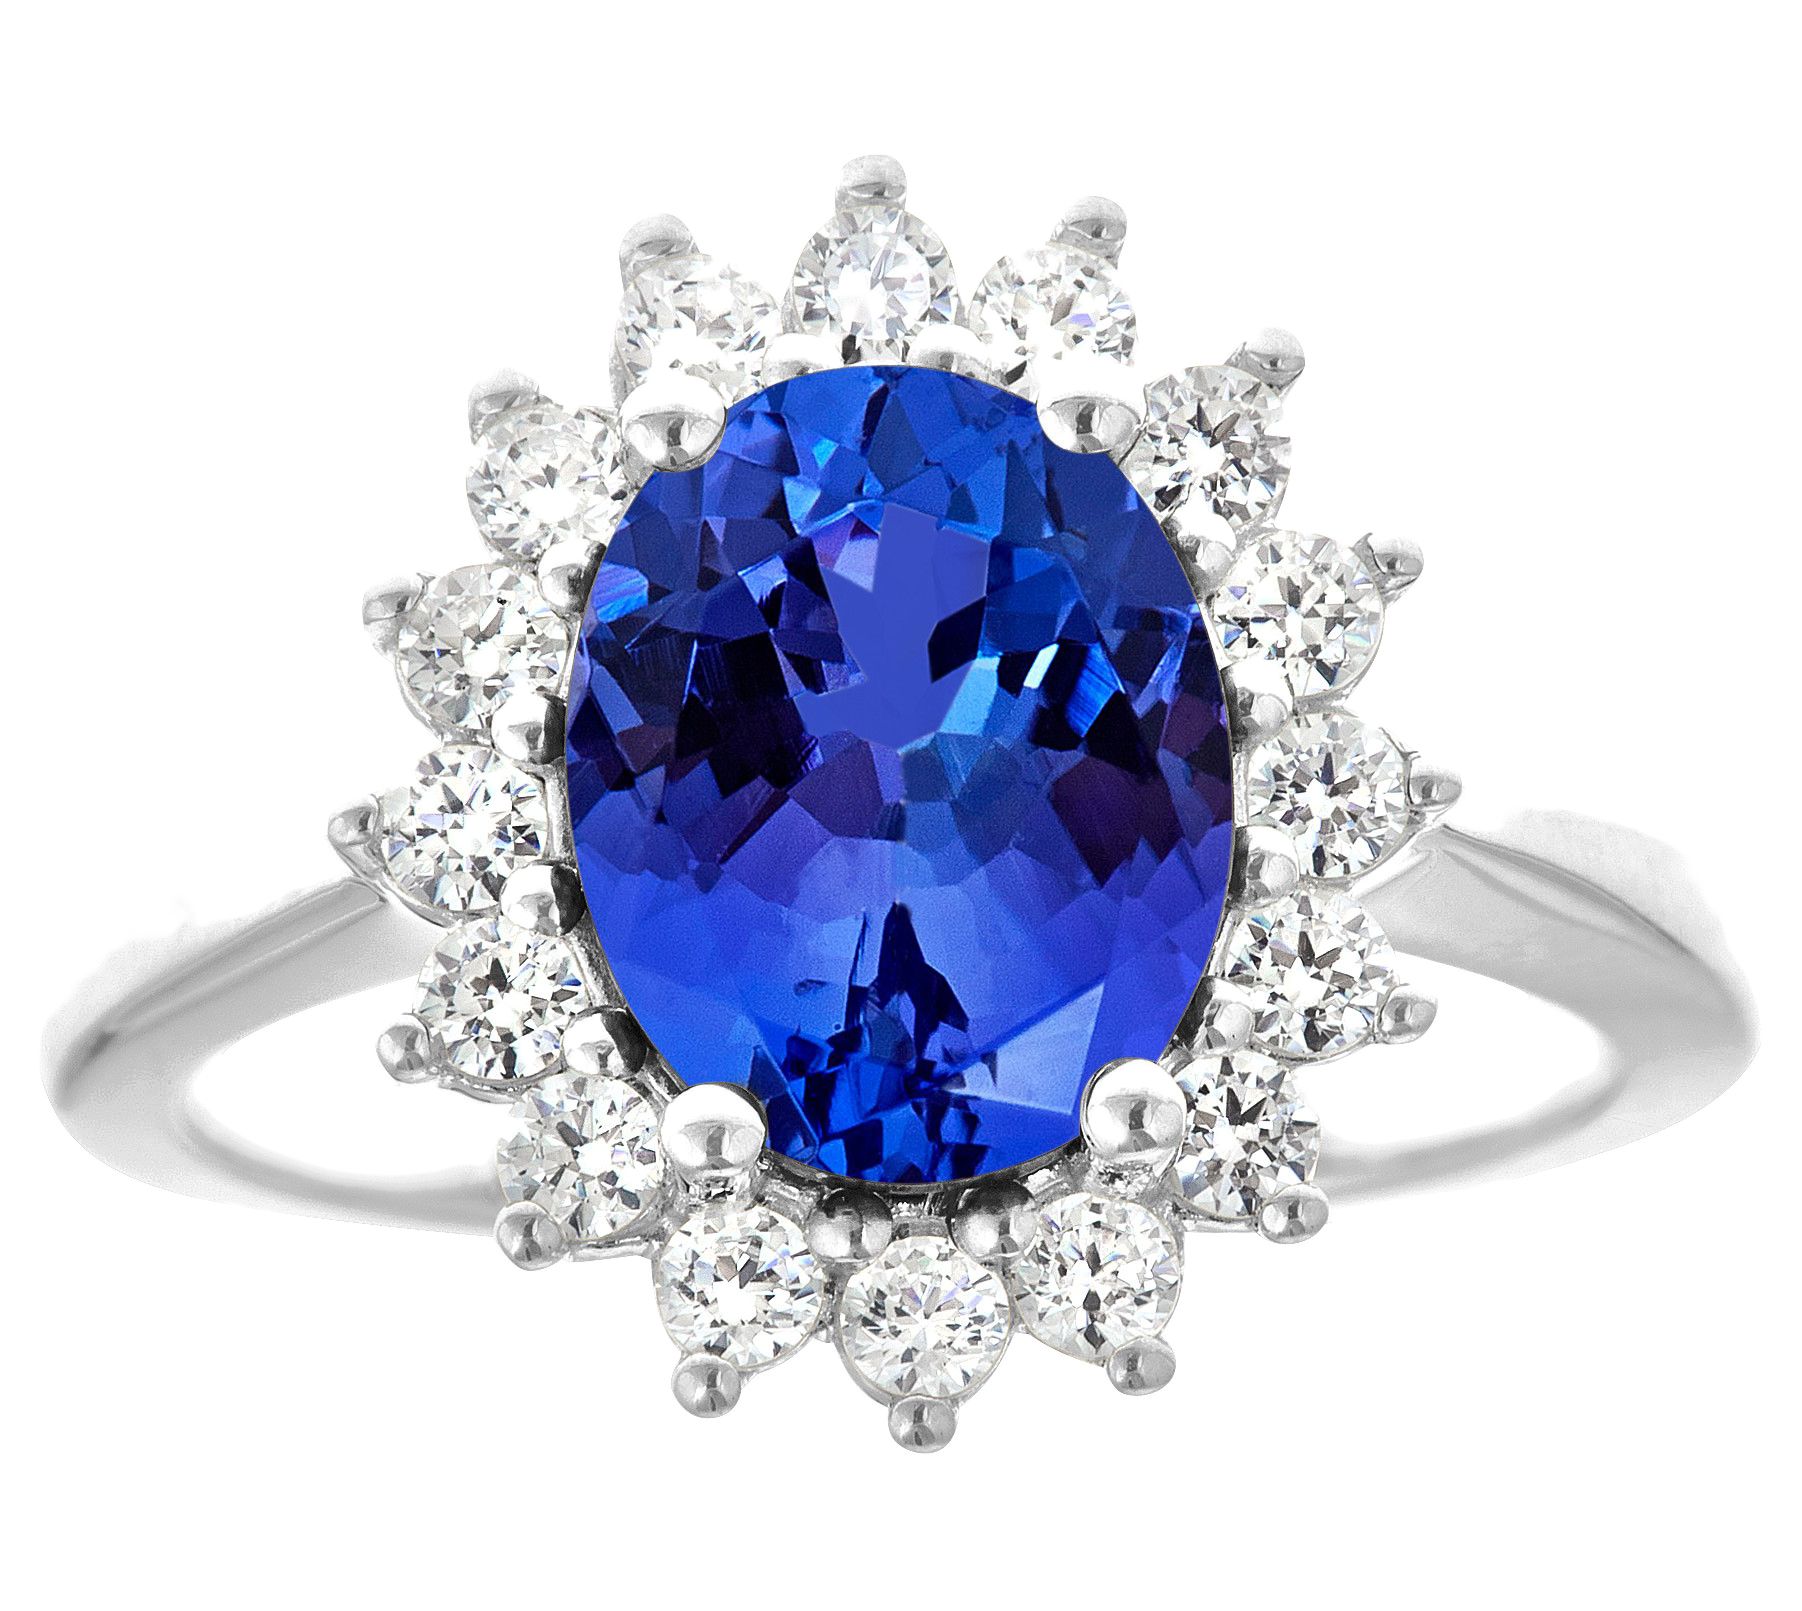 Affinity Gems 14K Gold 2.40 cttw Oval Tanzanite Halo Ring - QVC.com